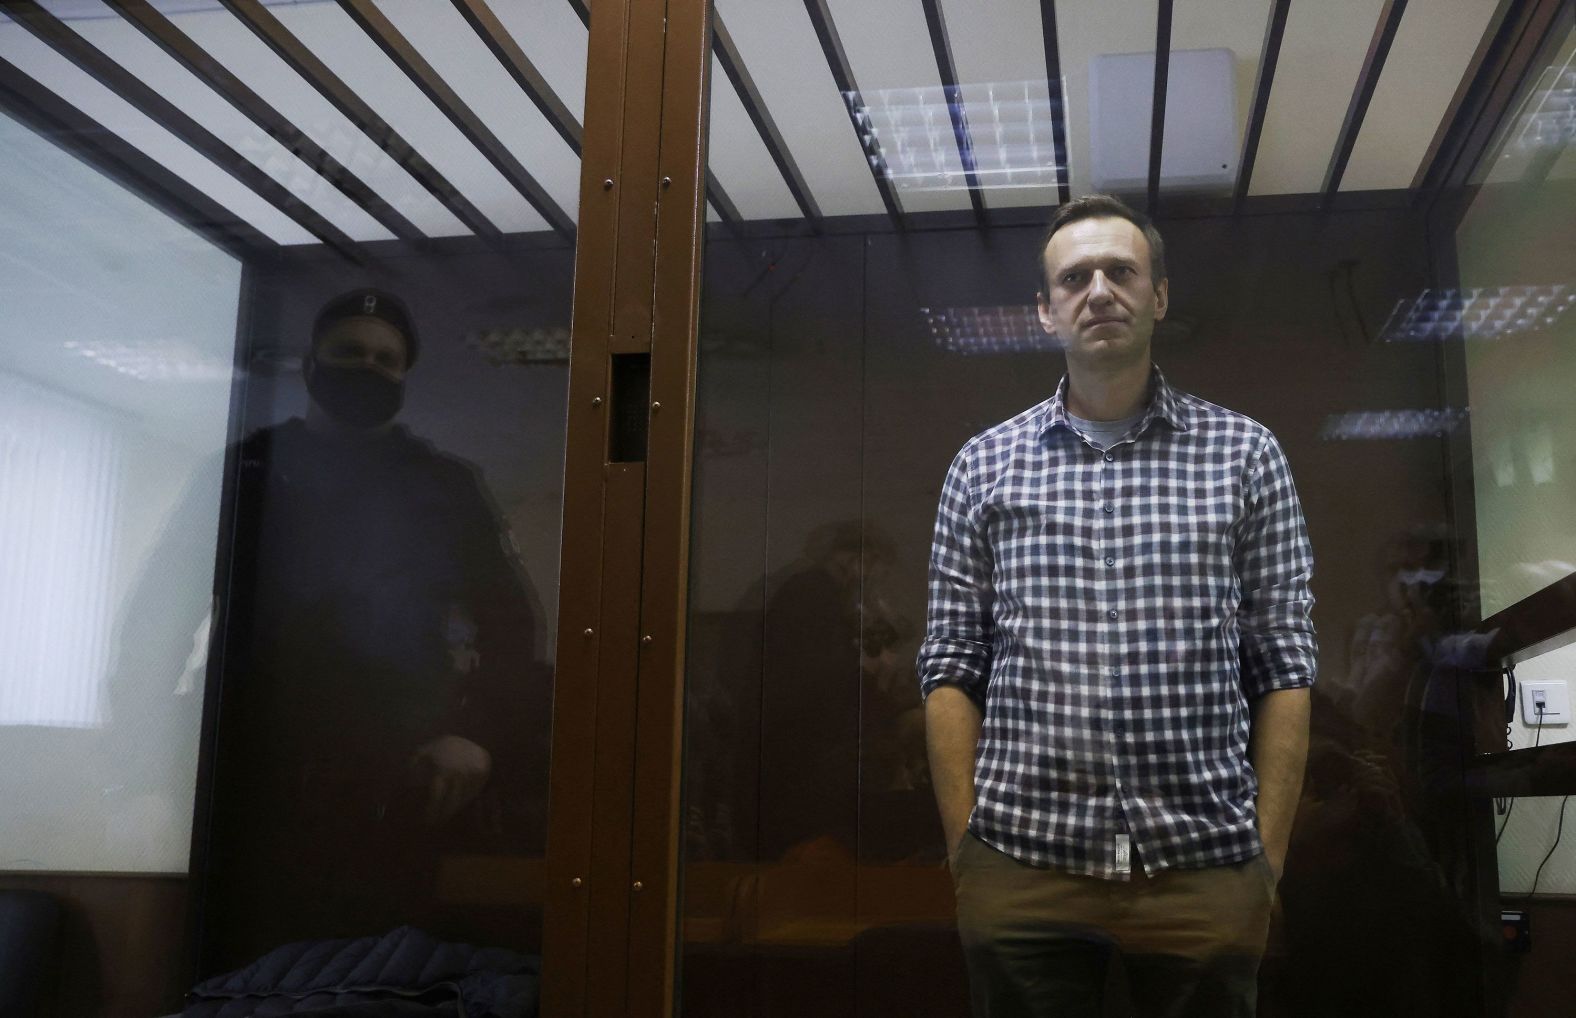 Jailed Russian opposition figure and outspoken Kremlin critic <a href="https://www.cnn.com/2024/02/16/europe/alexey-navalny-dead-russia-prison-intl/index.html" target="_blank">Alexey Navalny</a>, who made global headlines when he was poisoned with a nerve agent in 2020, died February 16 at the age of 47, the Russian prison service said. Navalny "felt unwell after a walk" and "almost immediately" lost consciousness, the prison service said. It said it was investigating his "sudden death."